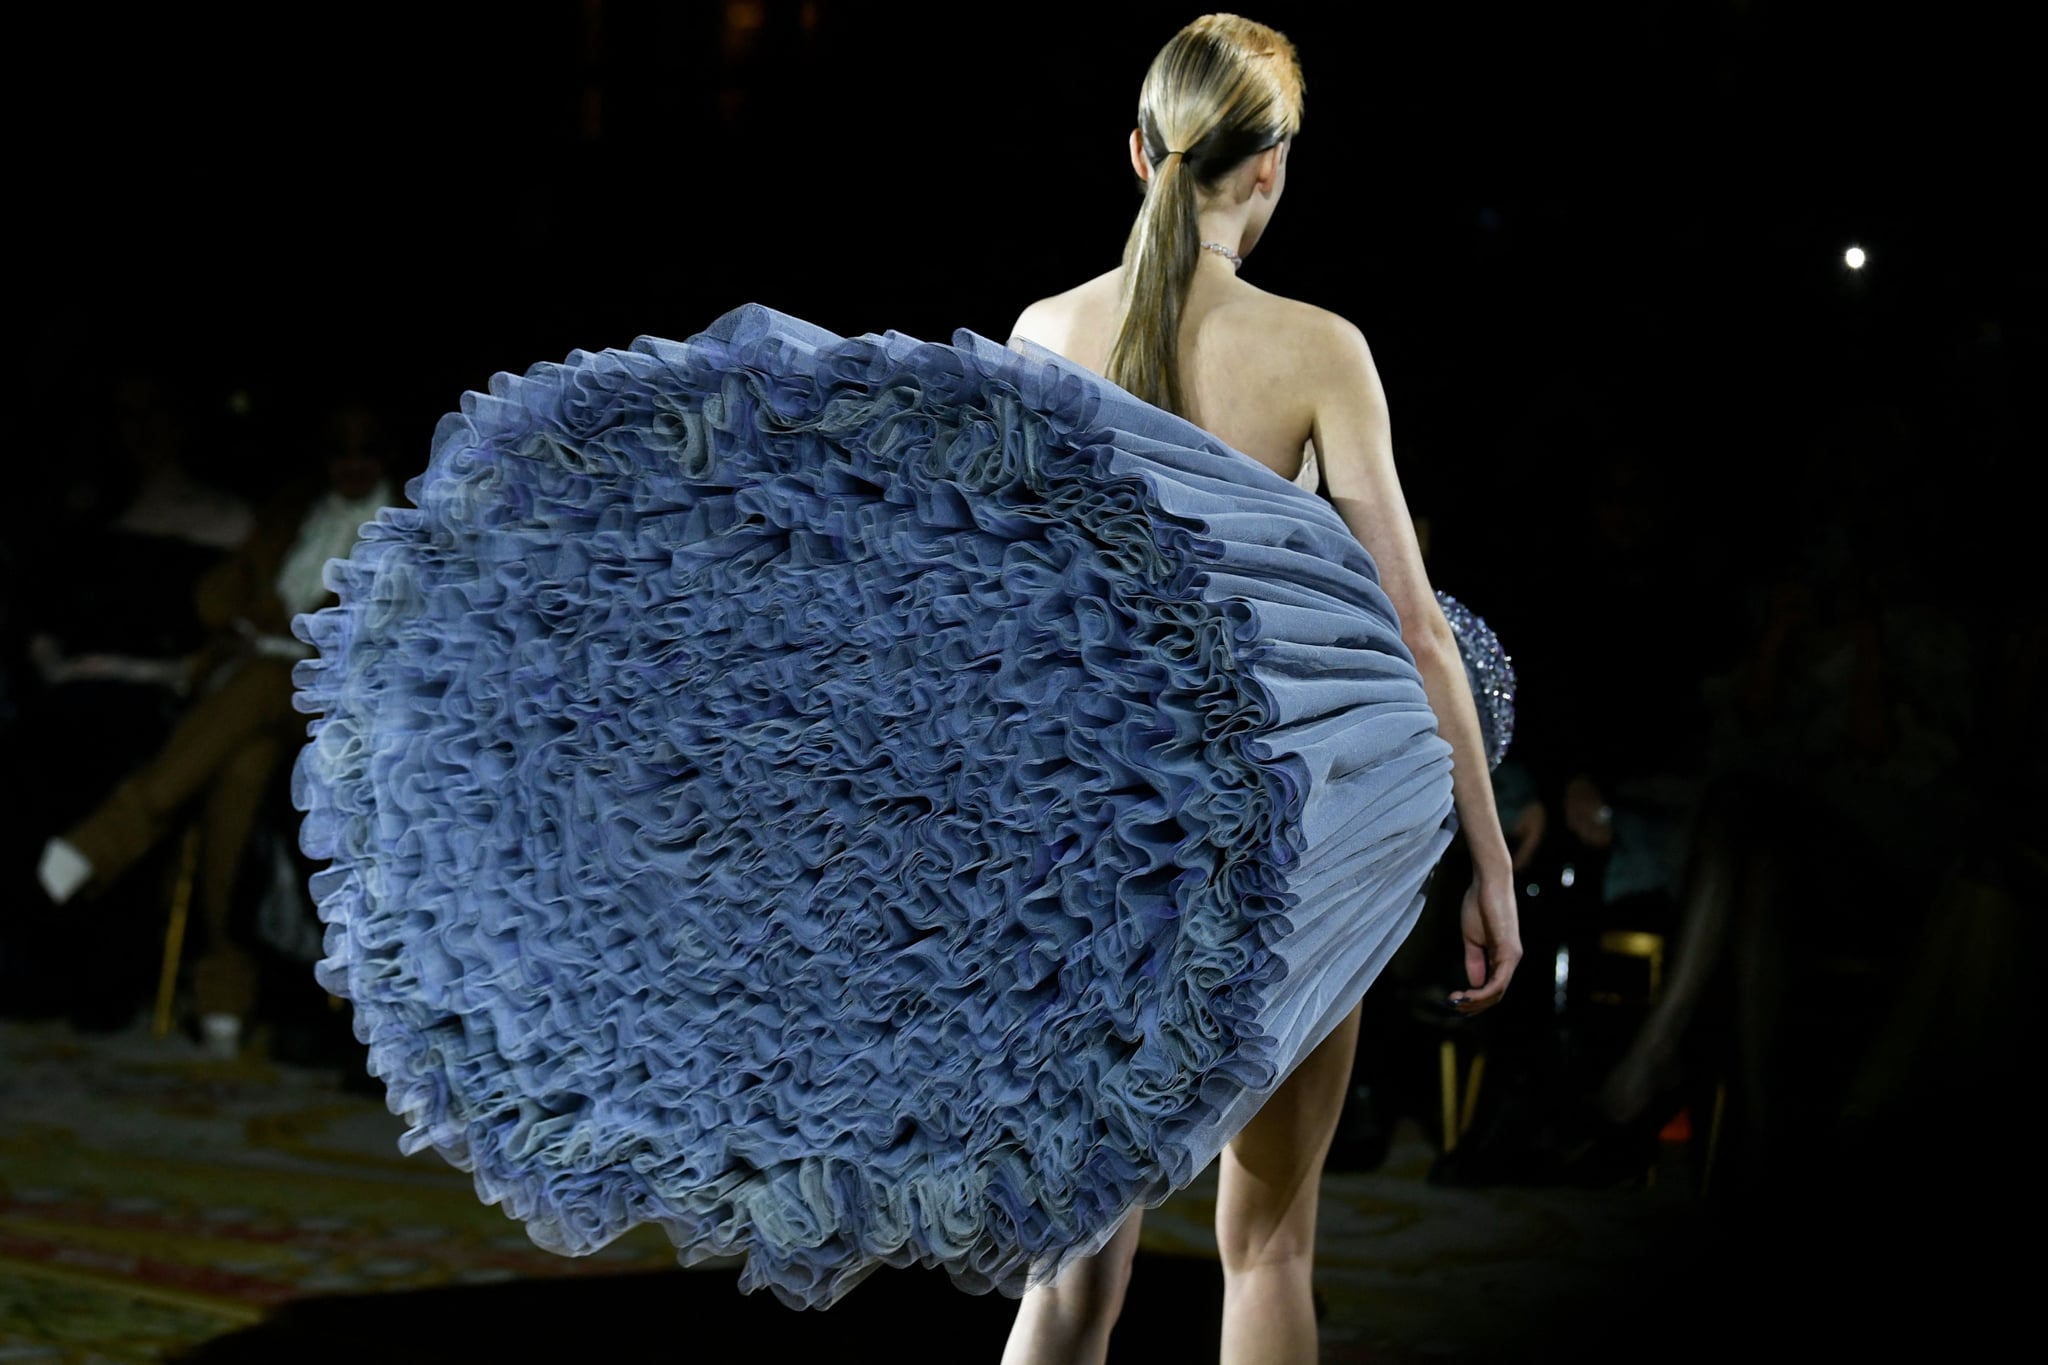 Viktor & Rolf show features upside-down and sideways gowns at Paris Haute  Couture Week 2023